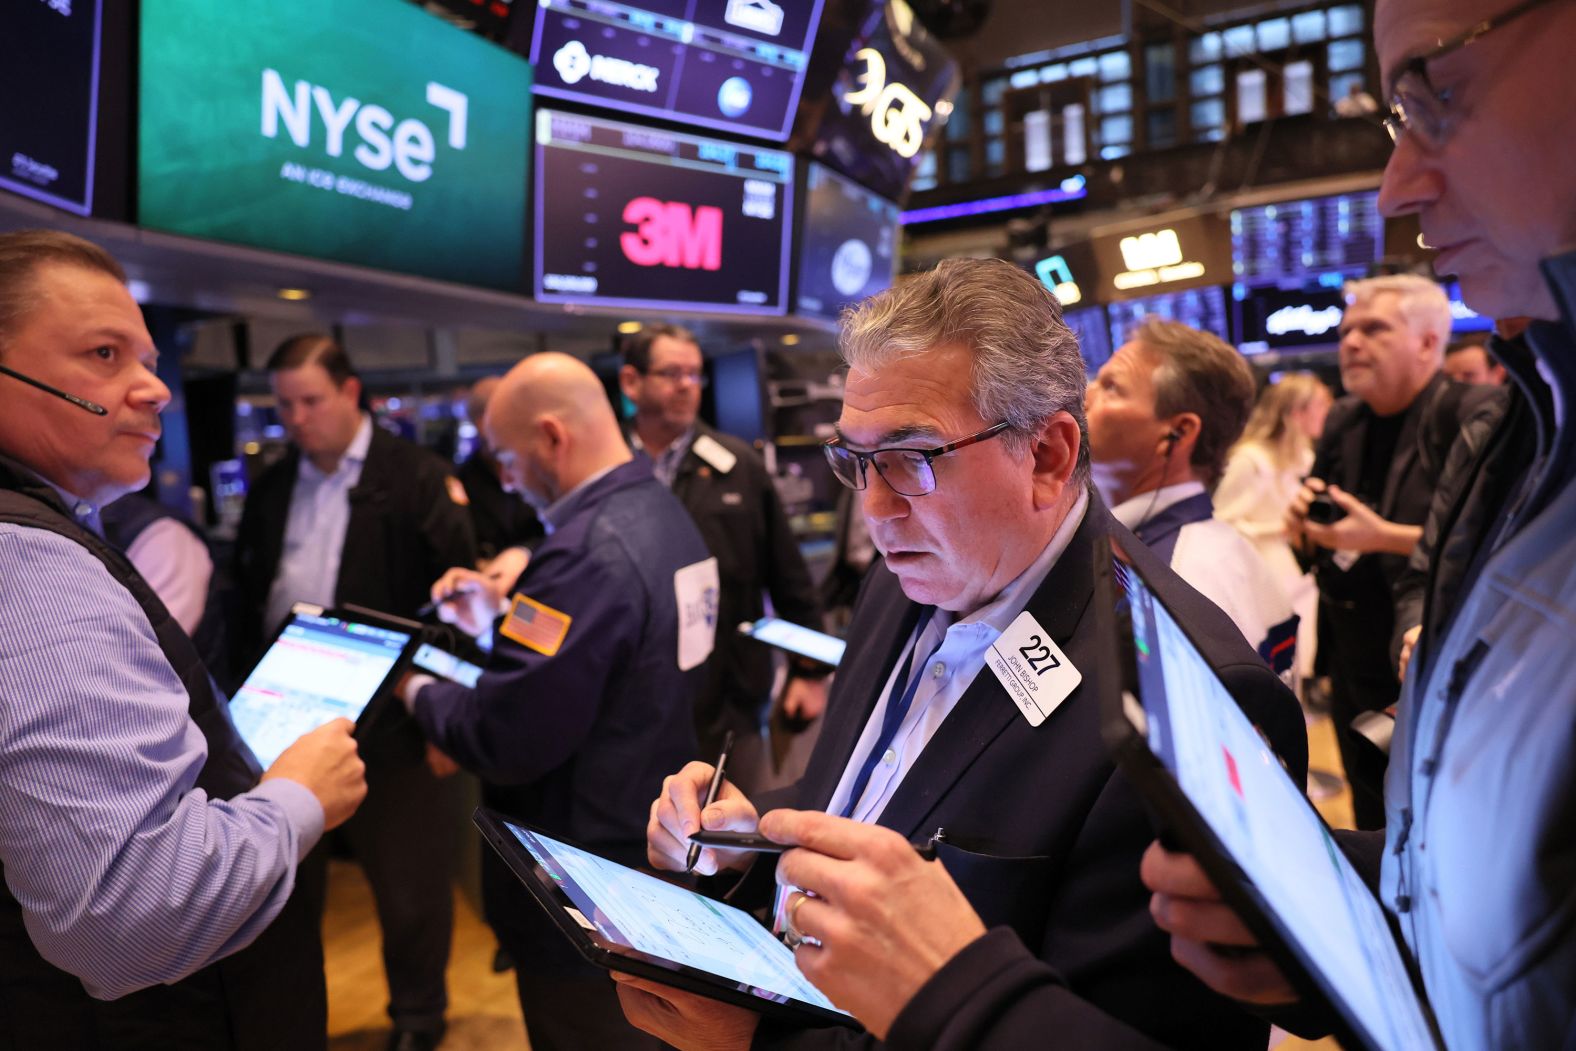 Traders work on the floor of the New York Stock Exchange on Monday, March 13. Stocks continued their downward trend following news of <a href="index.php?page=&url=https%3A%2F%2Fwww.cnn.com%2F2023%2F03%2F10%2Finvesting%2Fsvb-bank%2Findex.html" target="_blank">the Silicon Valley Bank crisis</a>, the second largest bank failure in US history.